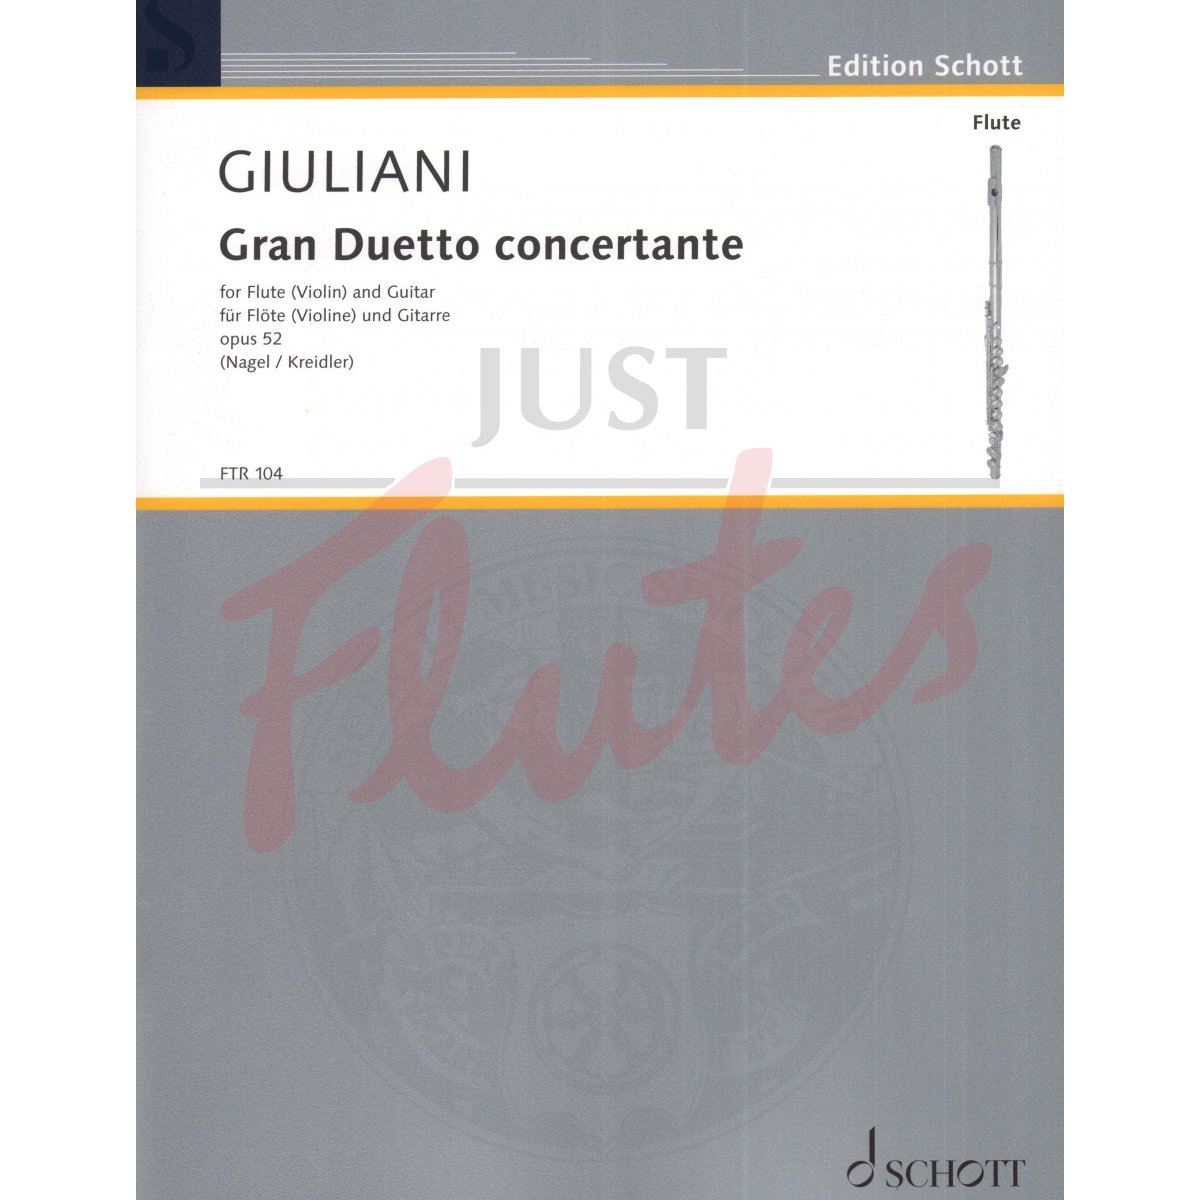 Gran Duetto Concertante for Flute (or Violin) and Guitar